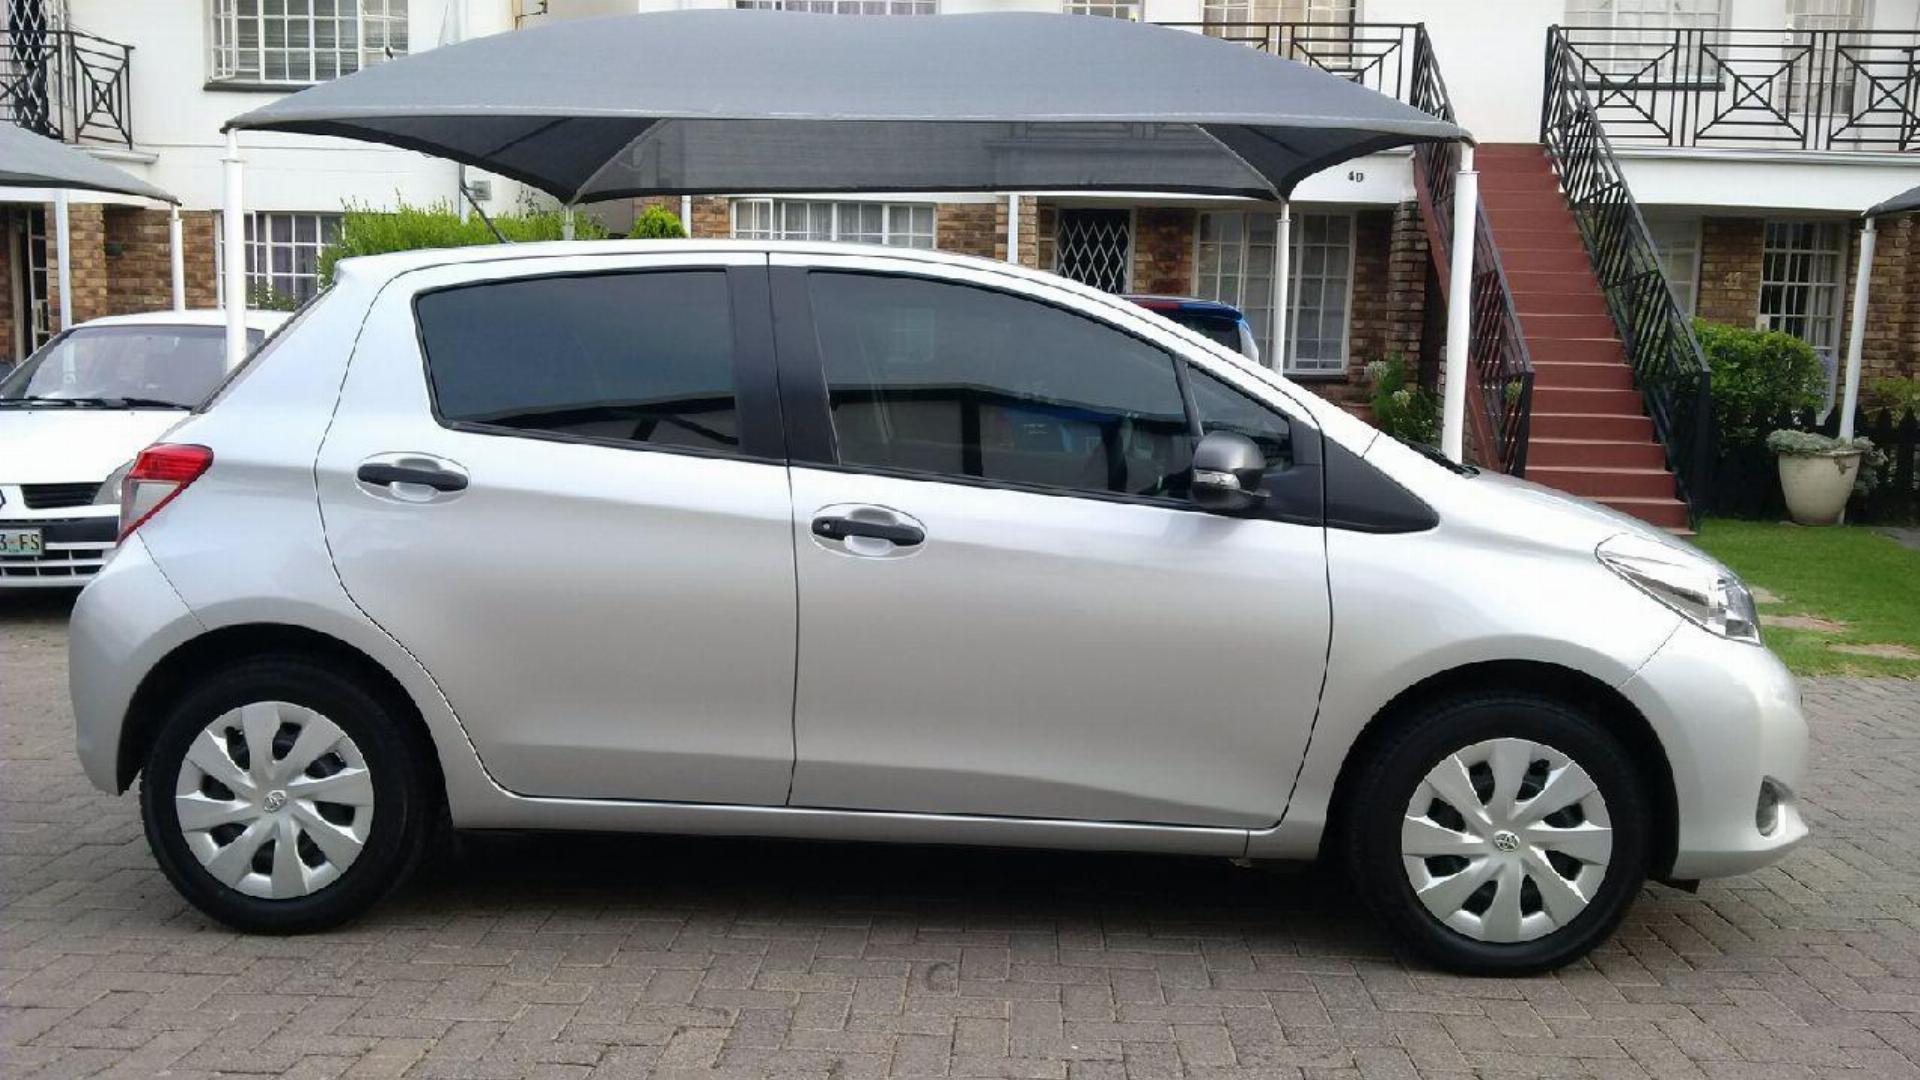 Used Toyota Yaris 1.3 XI 5DR 2012 on auction PV1010039